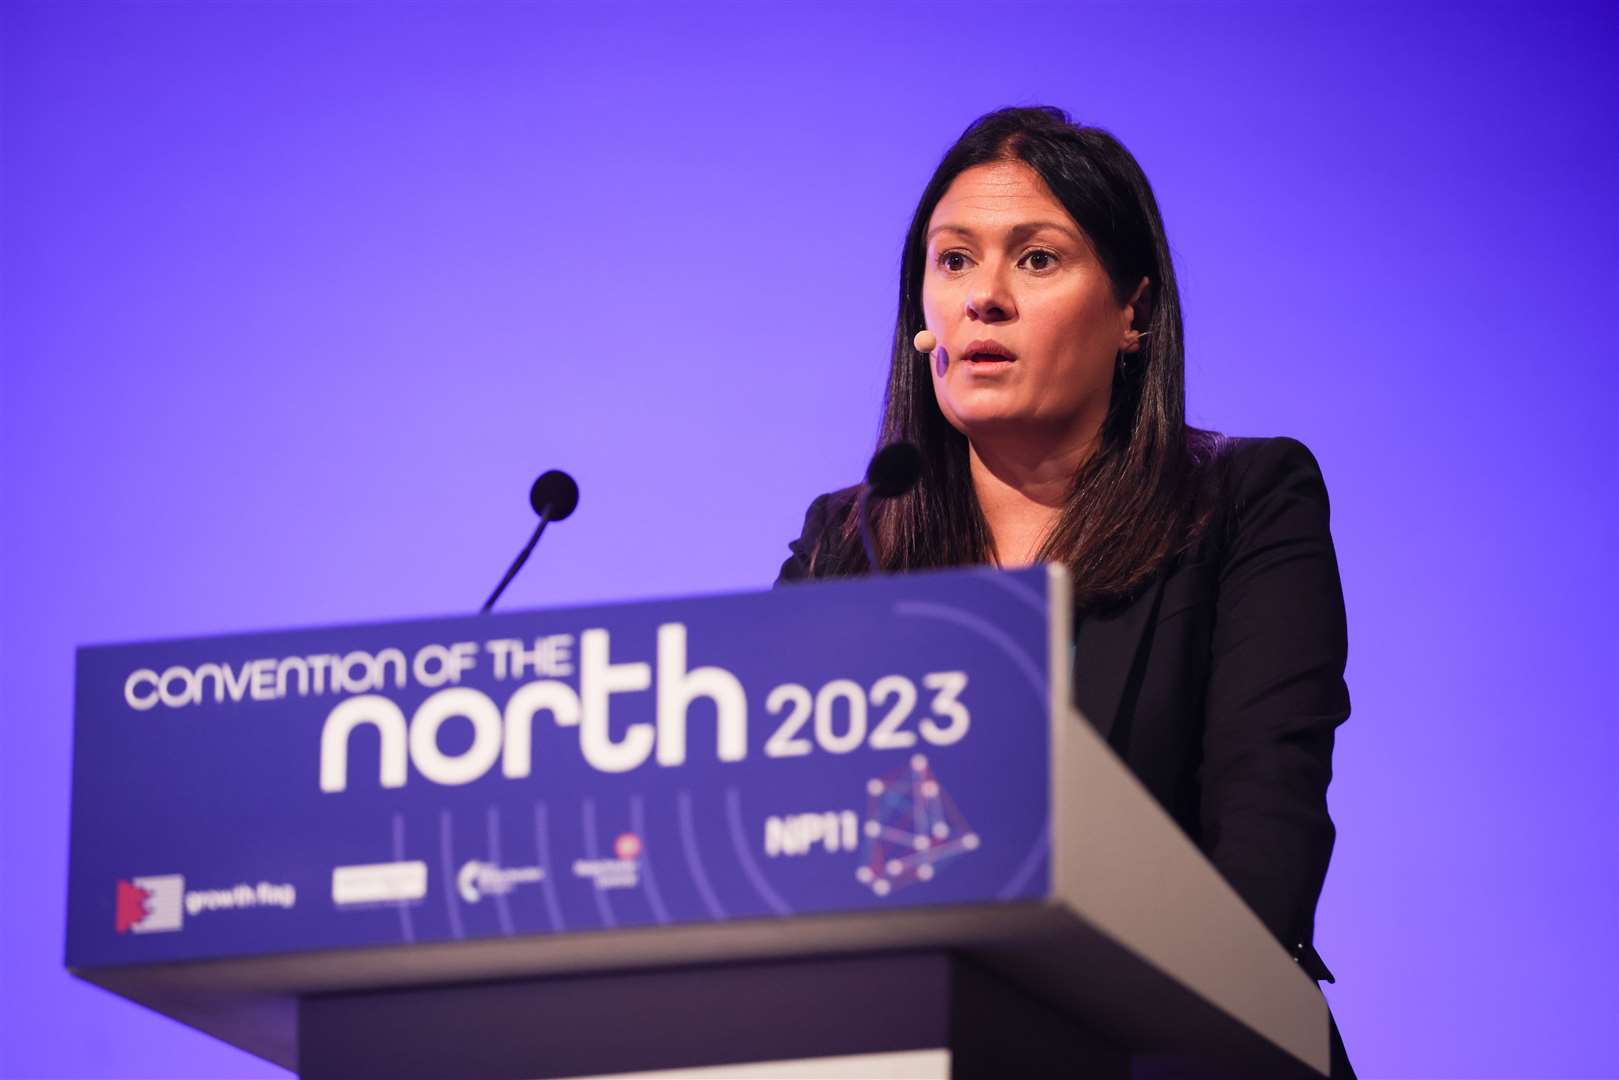 Lisa Nandy, Shadow Secretary of State for Levelling Up, Housing and Communities (James Speakman/AP)